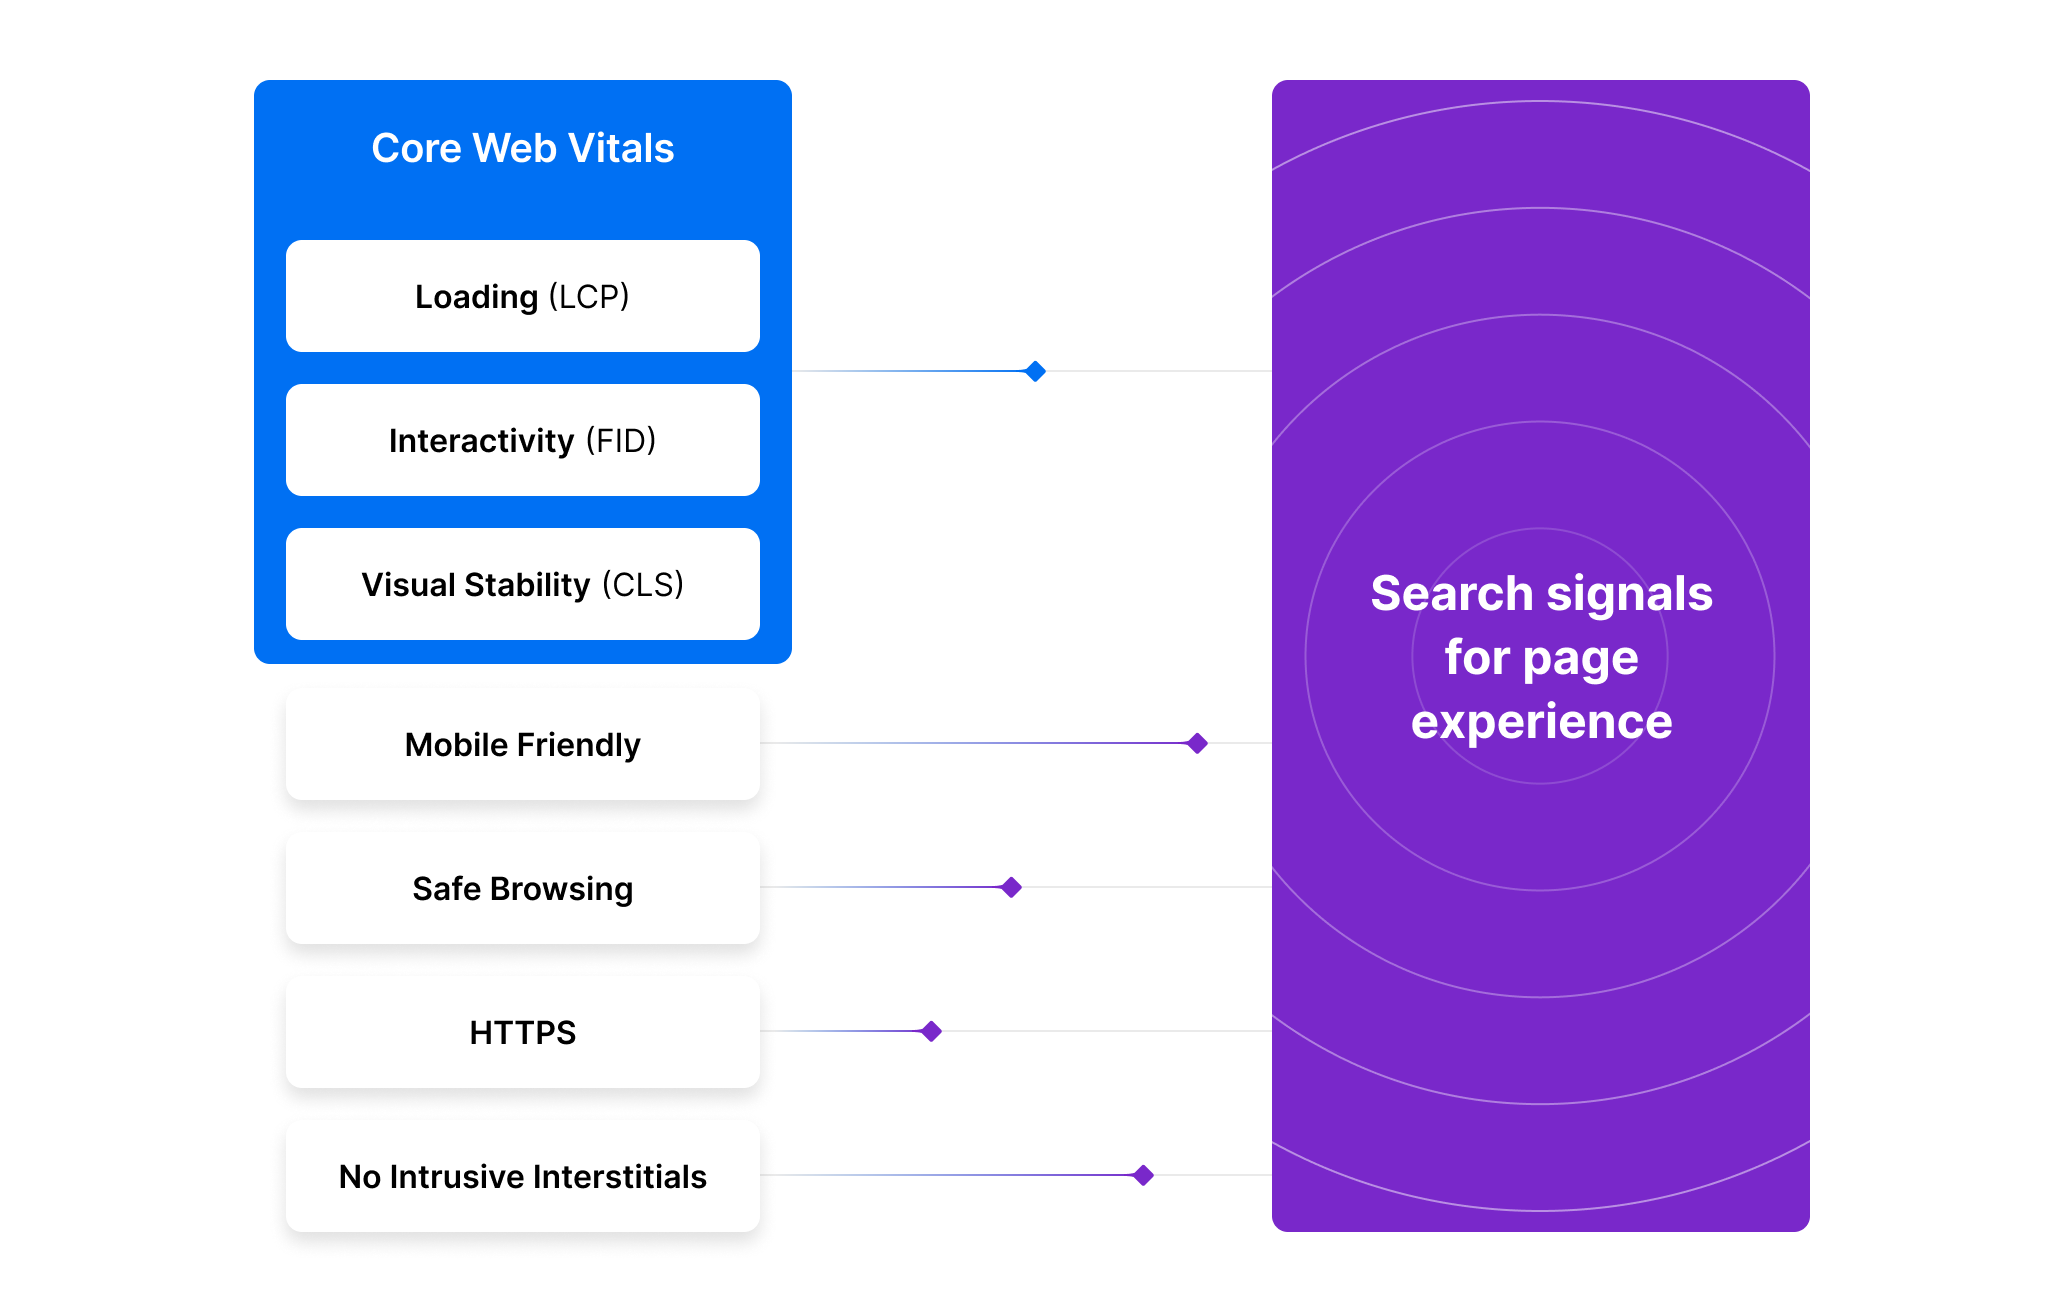 Search signals are the characteristics of your webpage that determine its Google ranking. Soon, the components of Core Web Vitals will be added to the list of signals to keep in mind when looking to improve SEO. 